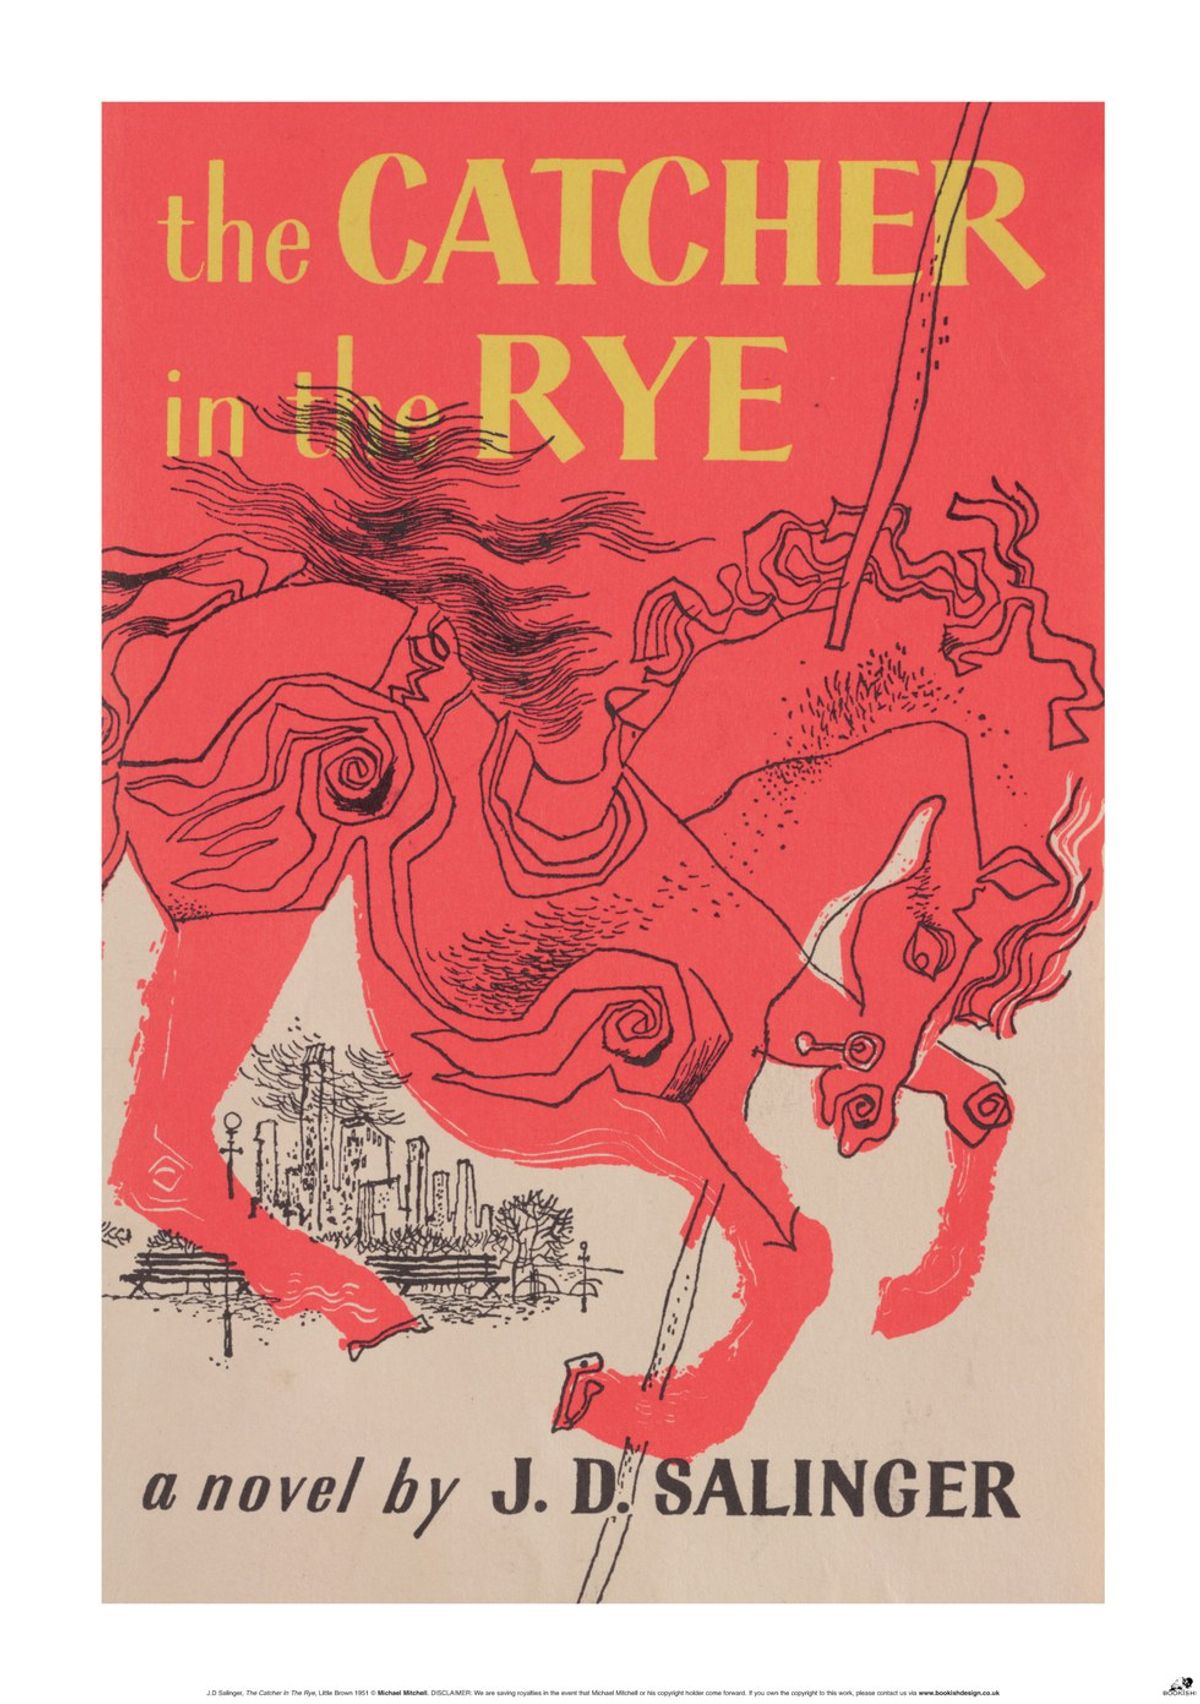 'The Catcher in the Rye': The Christmas Book You Never Knew Was A Christmas Book